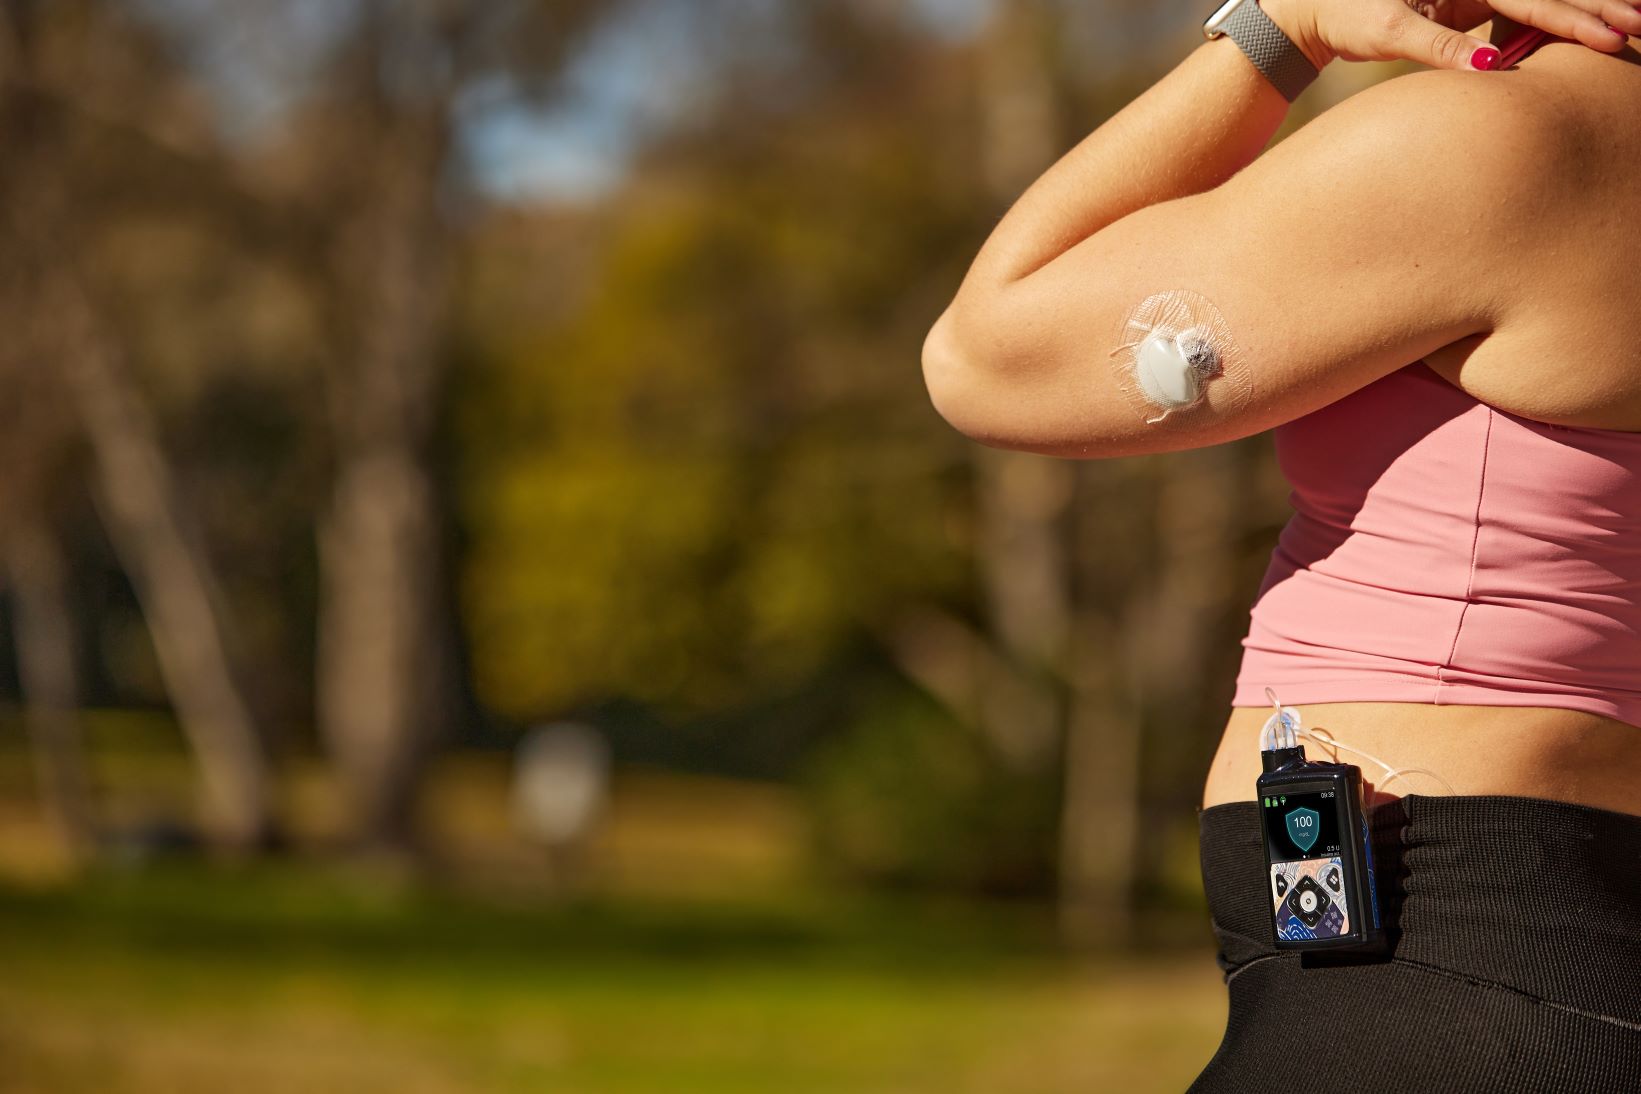 Insulin pump and CGM on a body